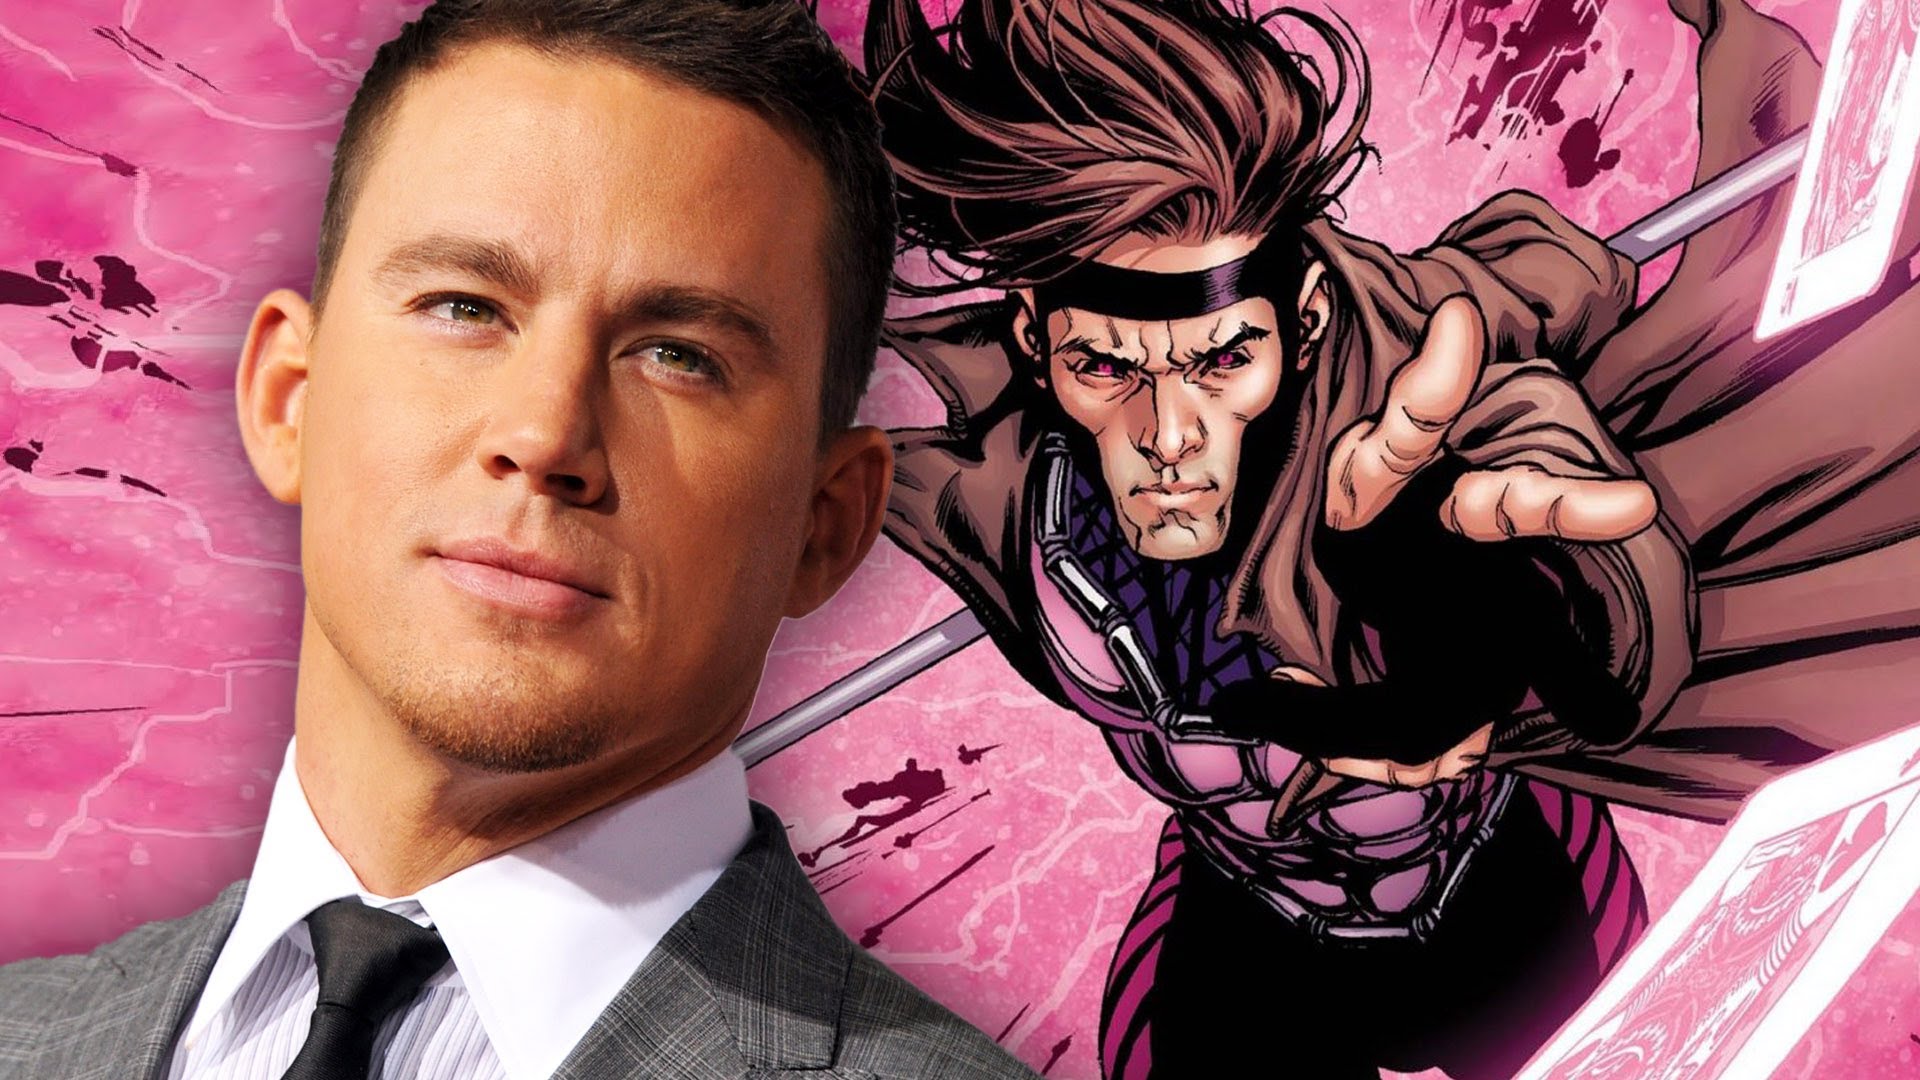 Channing Tatum Talks ‘Gambit’ And Being “Traumatized” When The ‘X-Men’ Spinoff Fell Apart